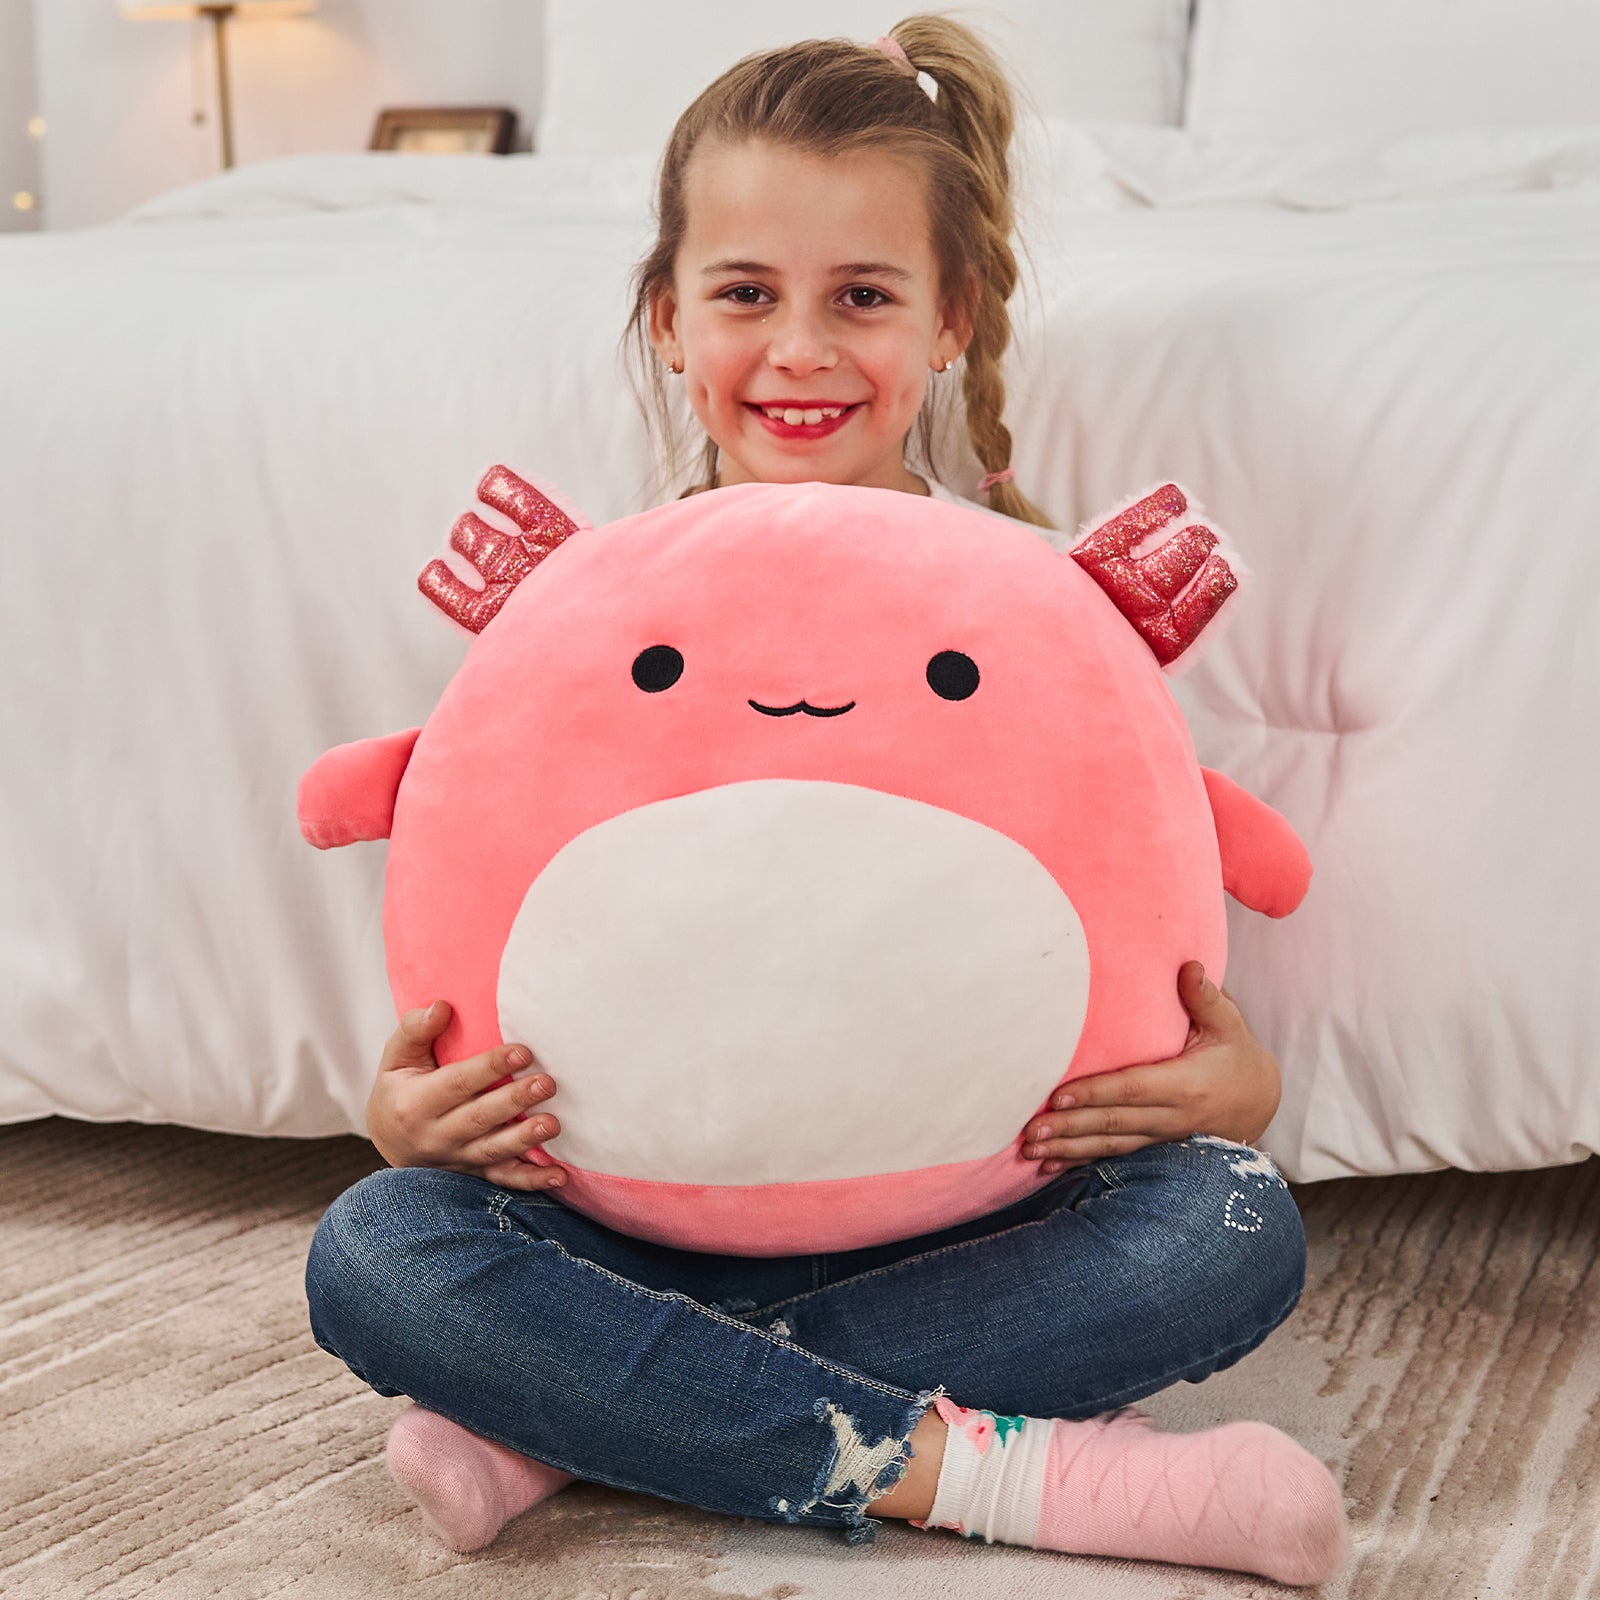 Axolotl Plush Toy, Mint Green/Pink, 16 Inches